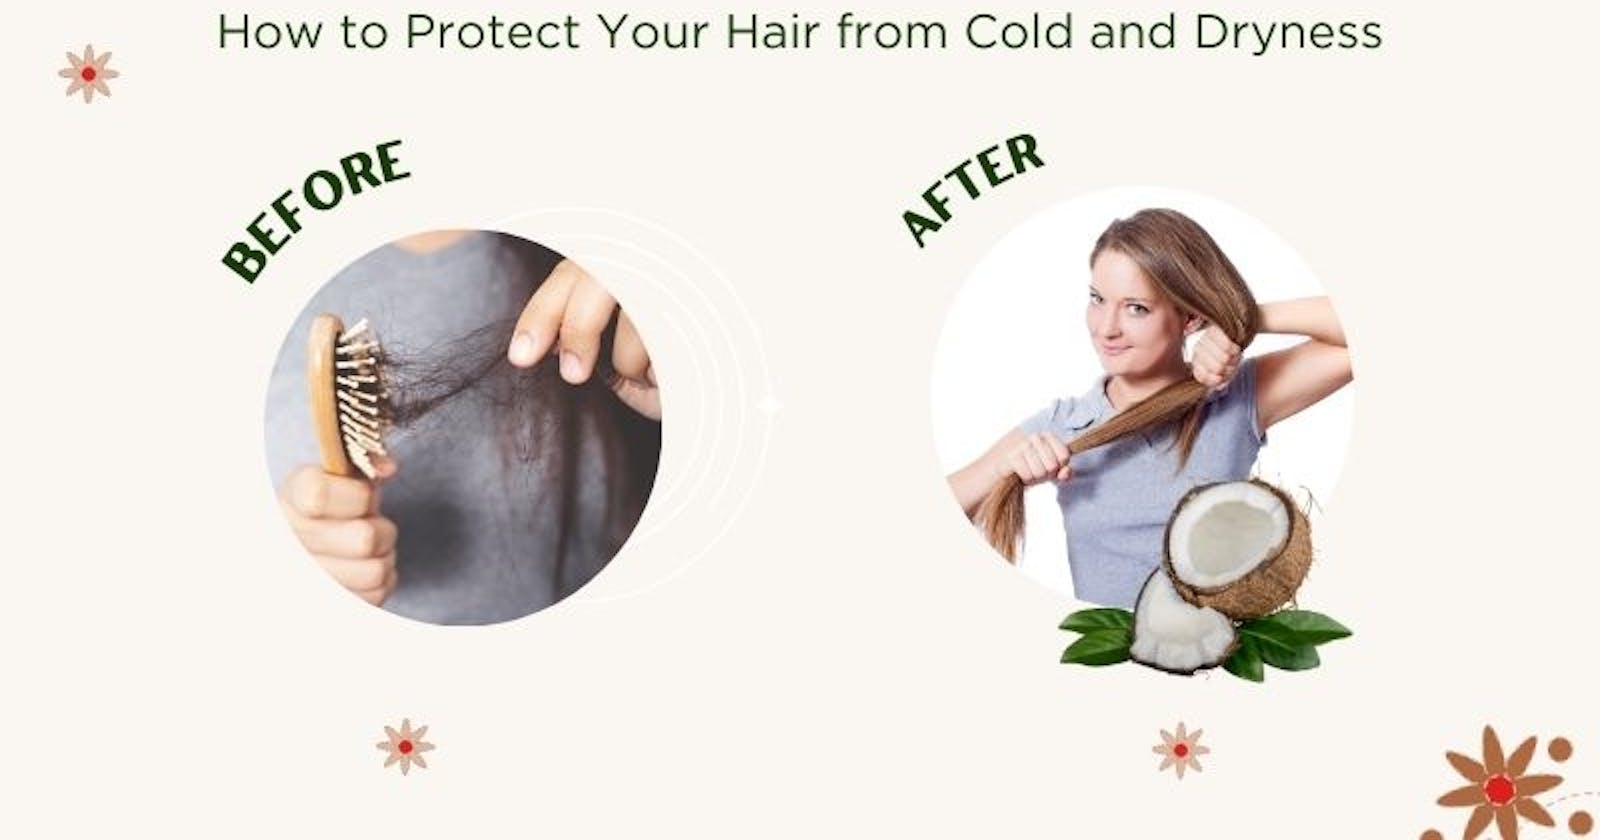 Winter Hair Care: How to Protect Your Hair from Cold and Dryness